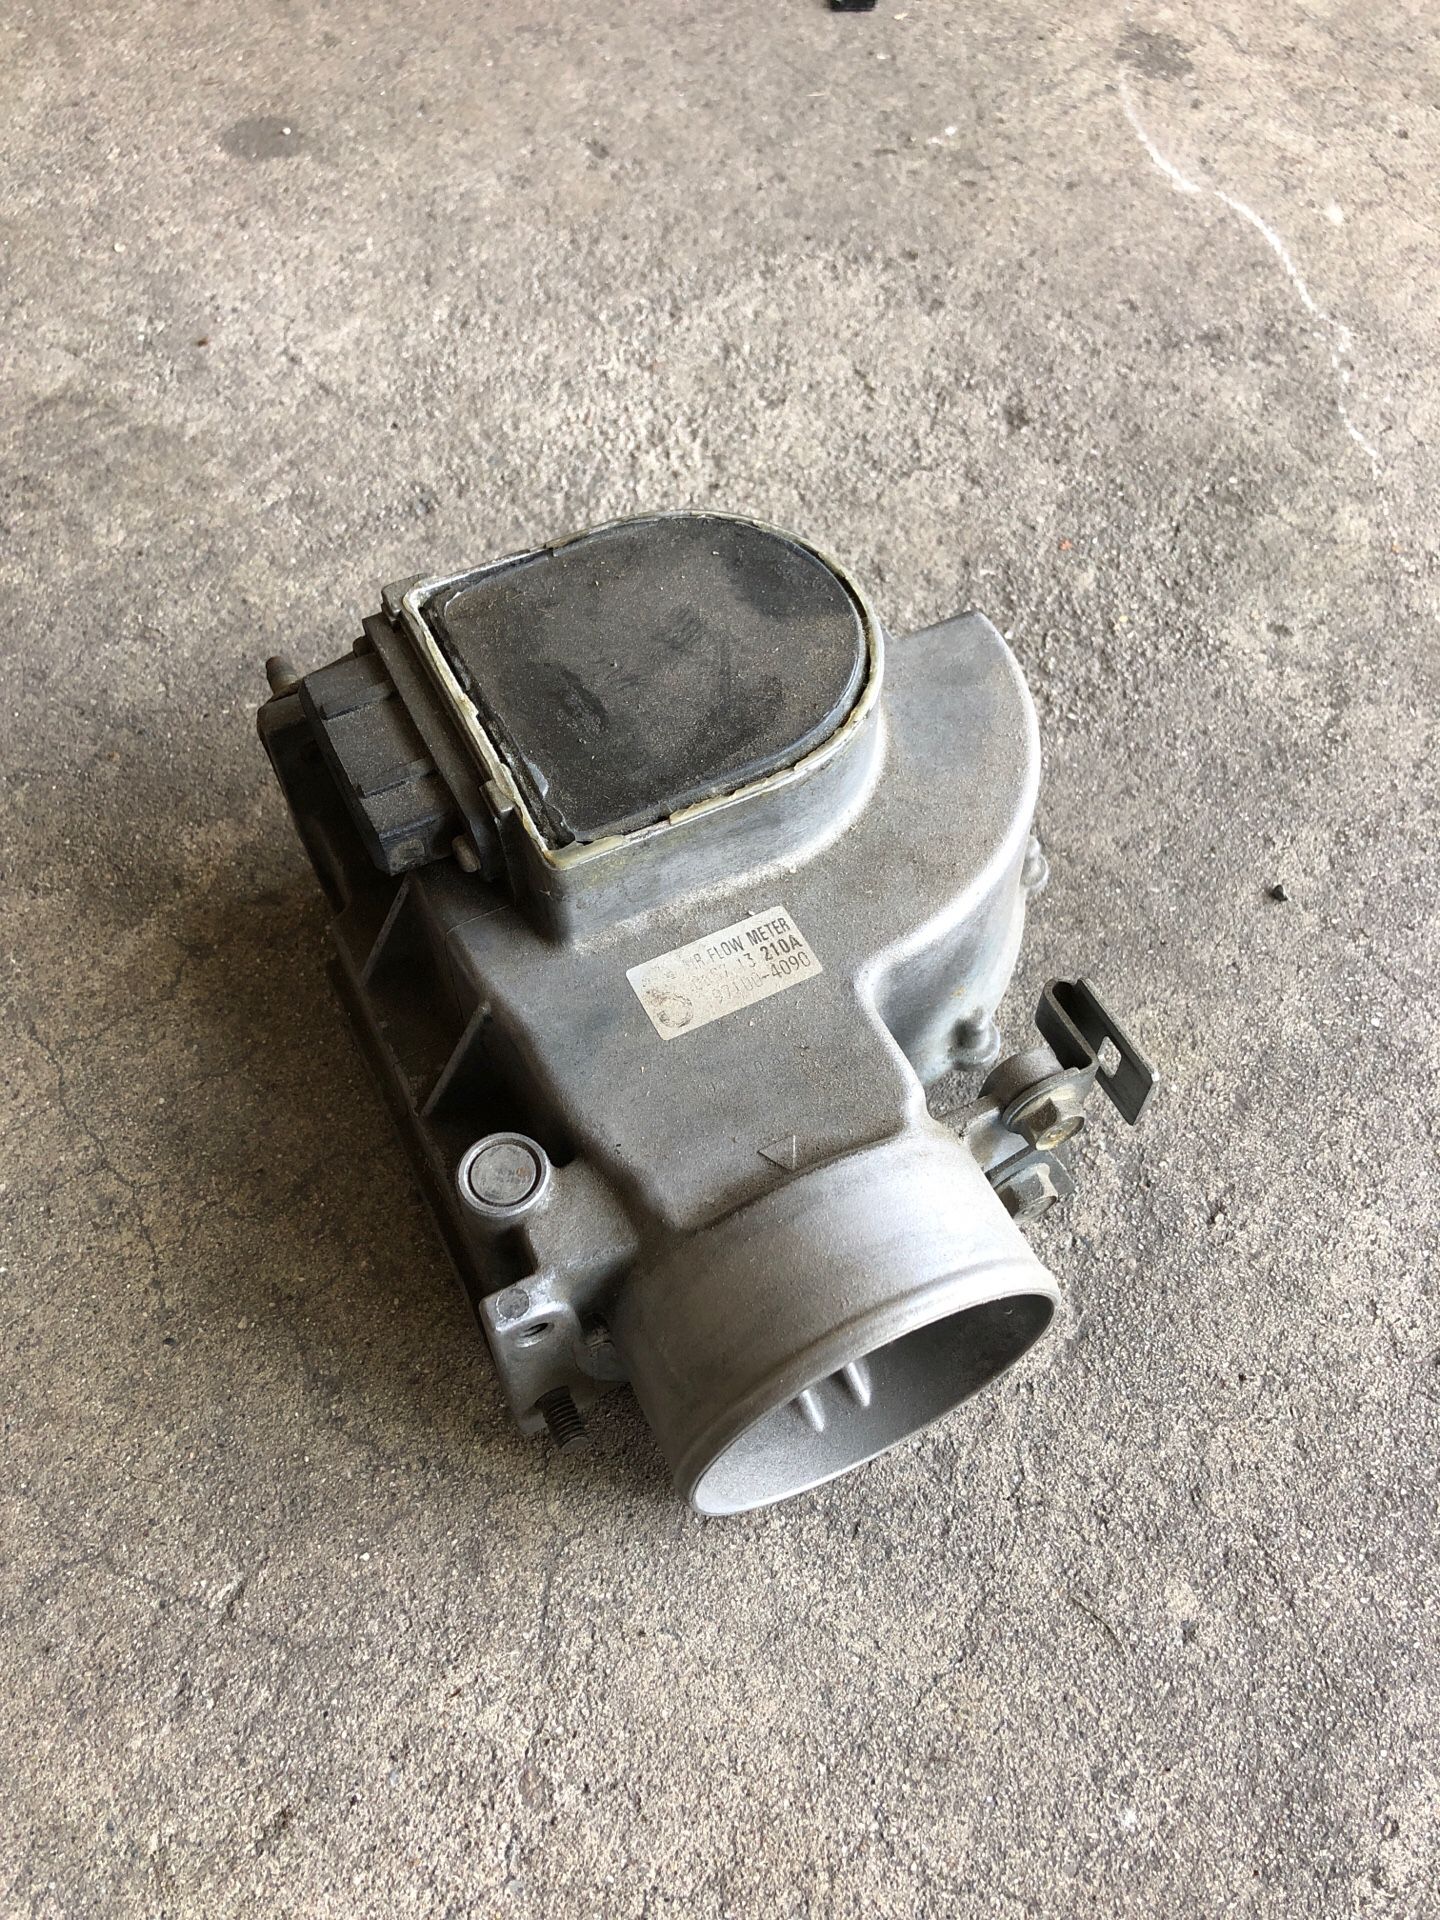 NA Miata Air Flow Meter (As-Is/For Parts)